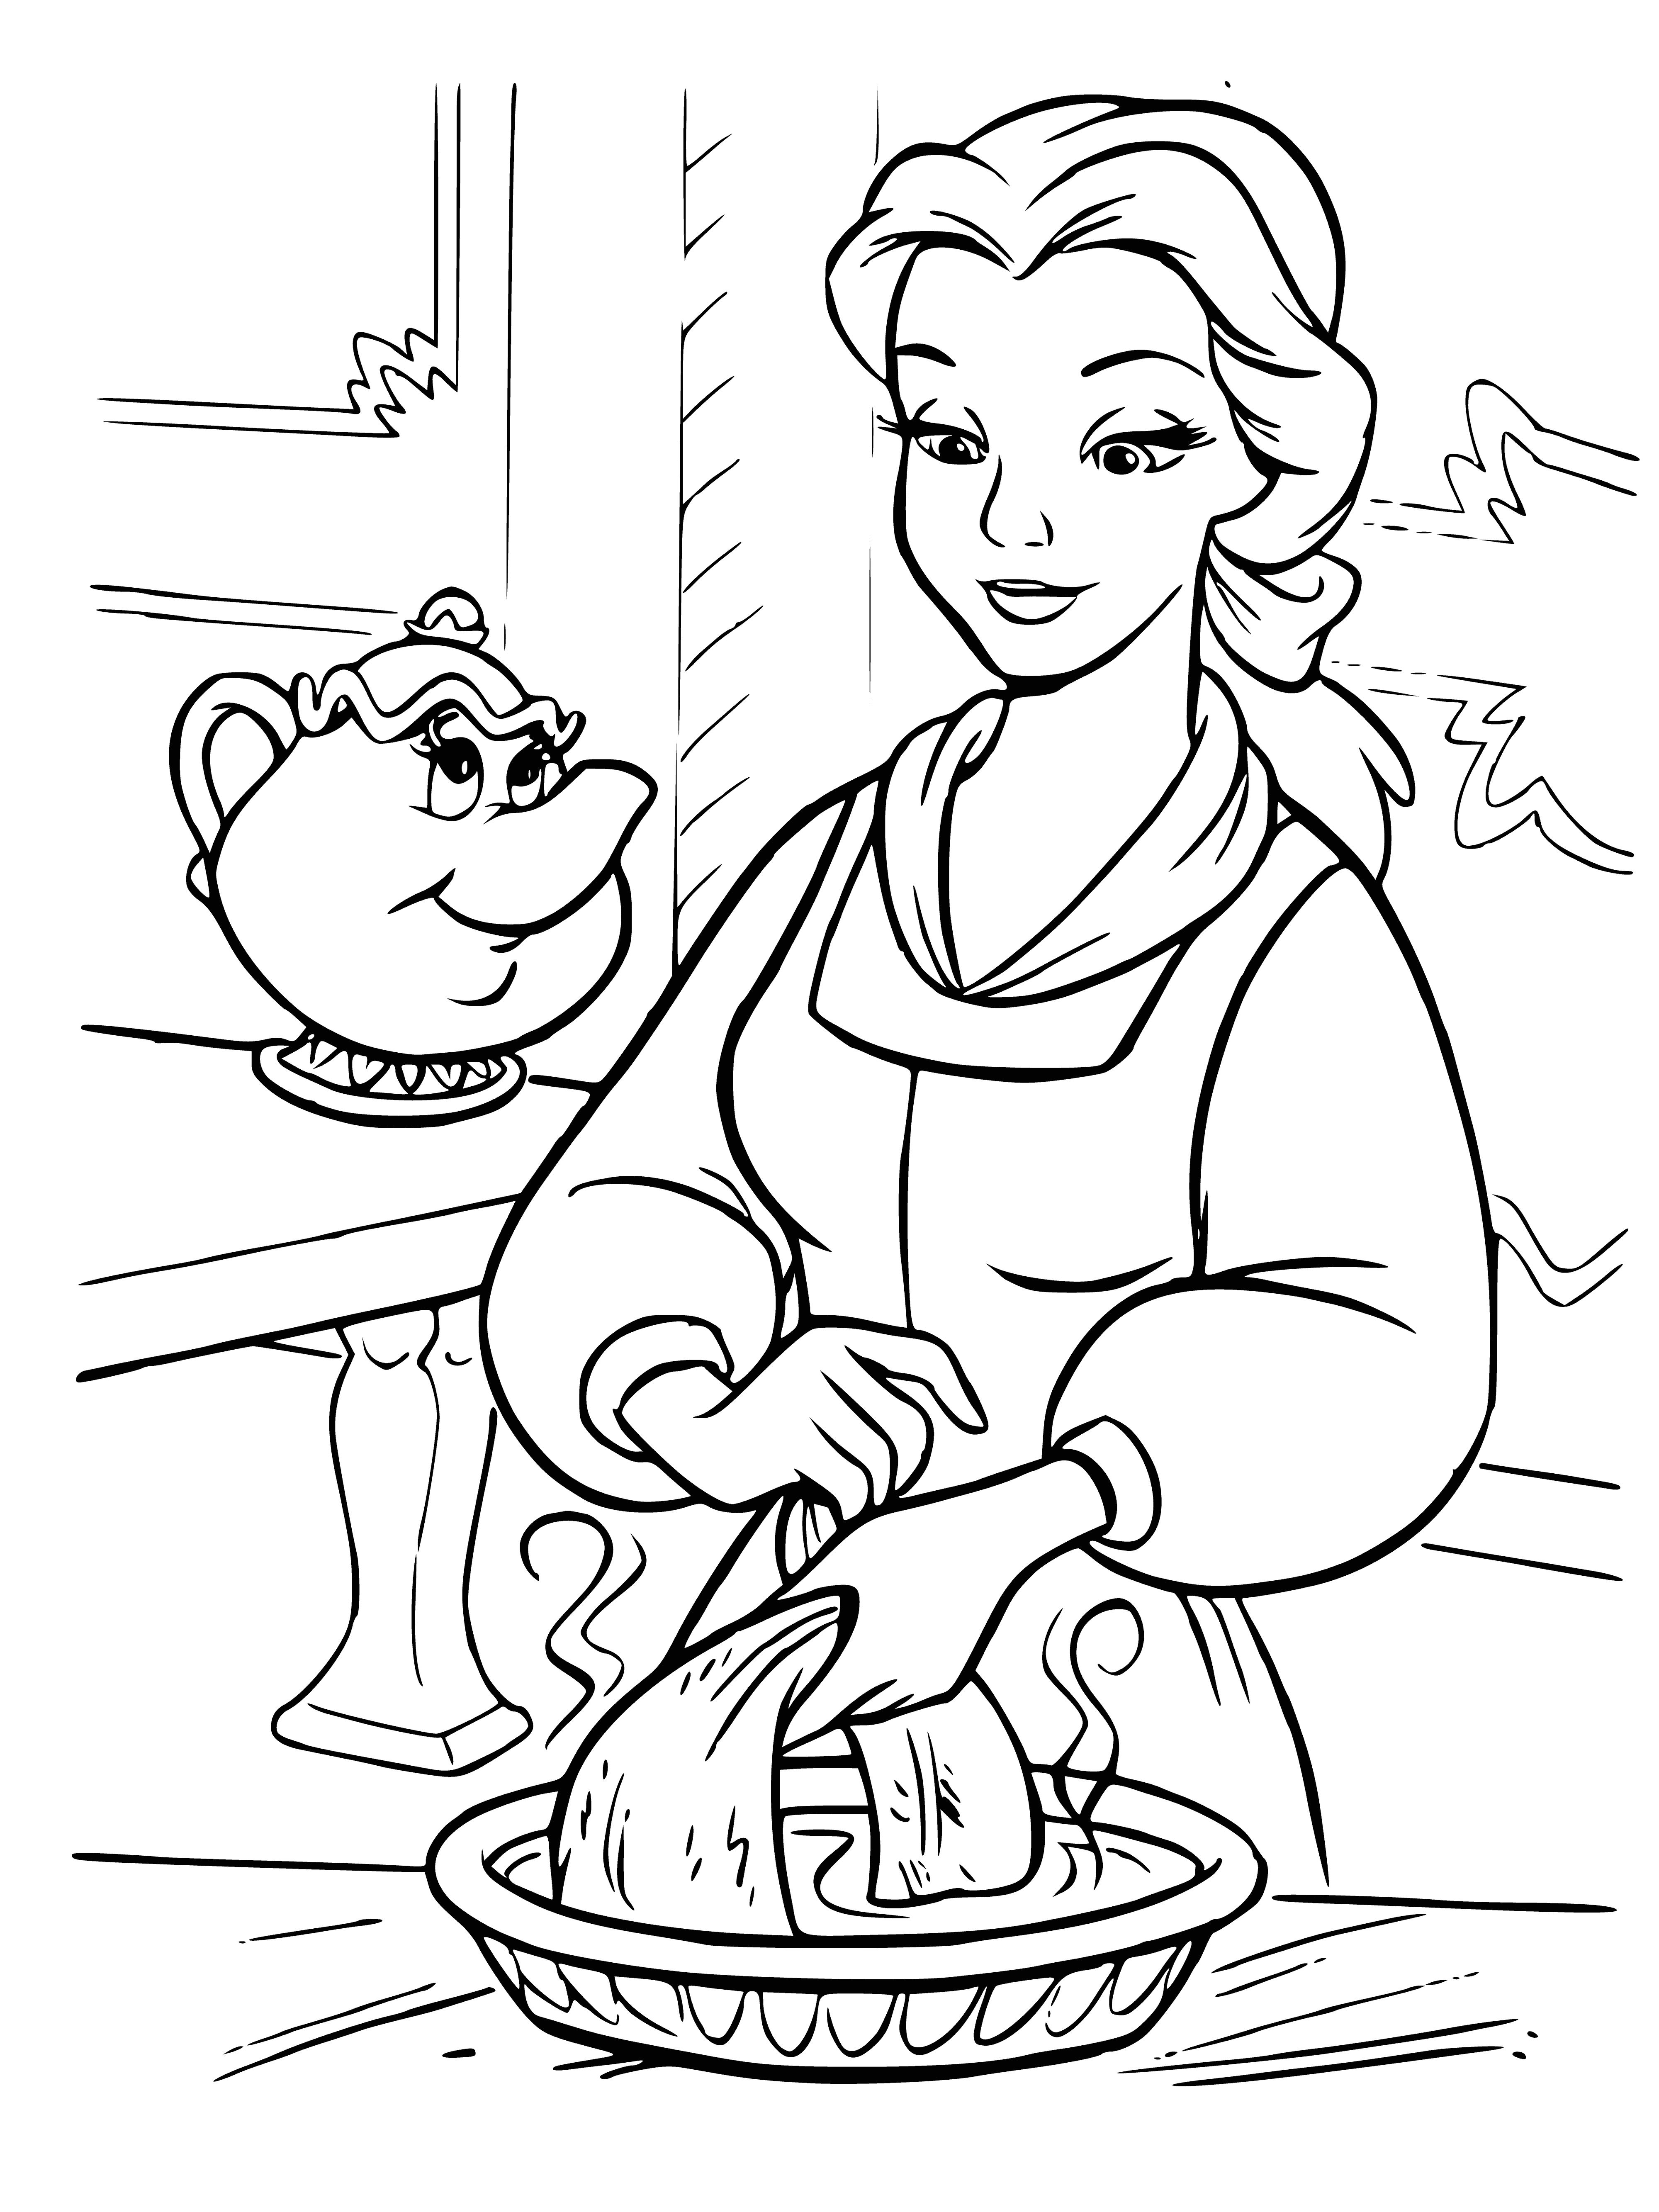 coloring page: 3 items: rose (red), book (blue), teapot (white/gold trim); all colors are visible on the coloring page.